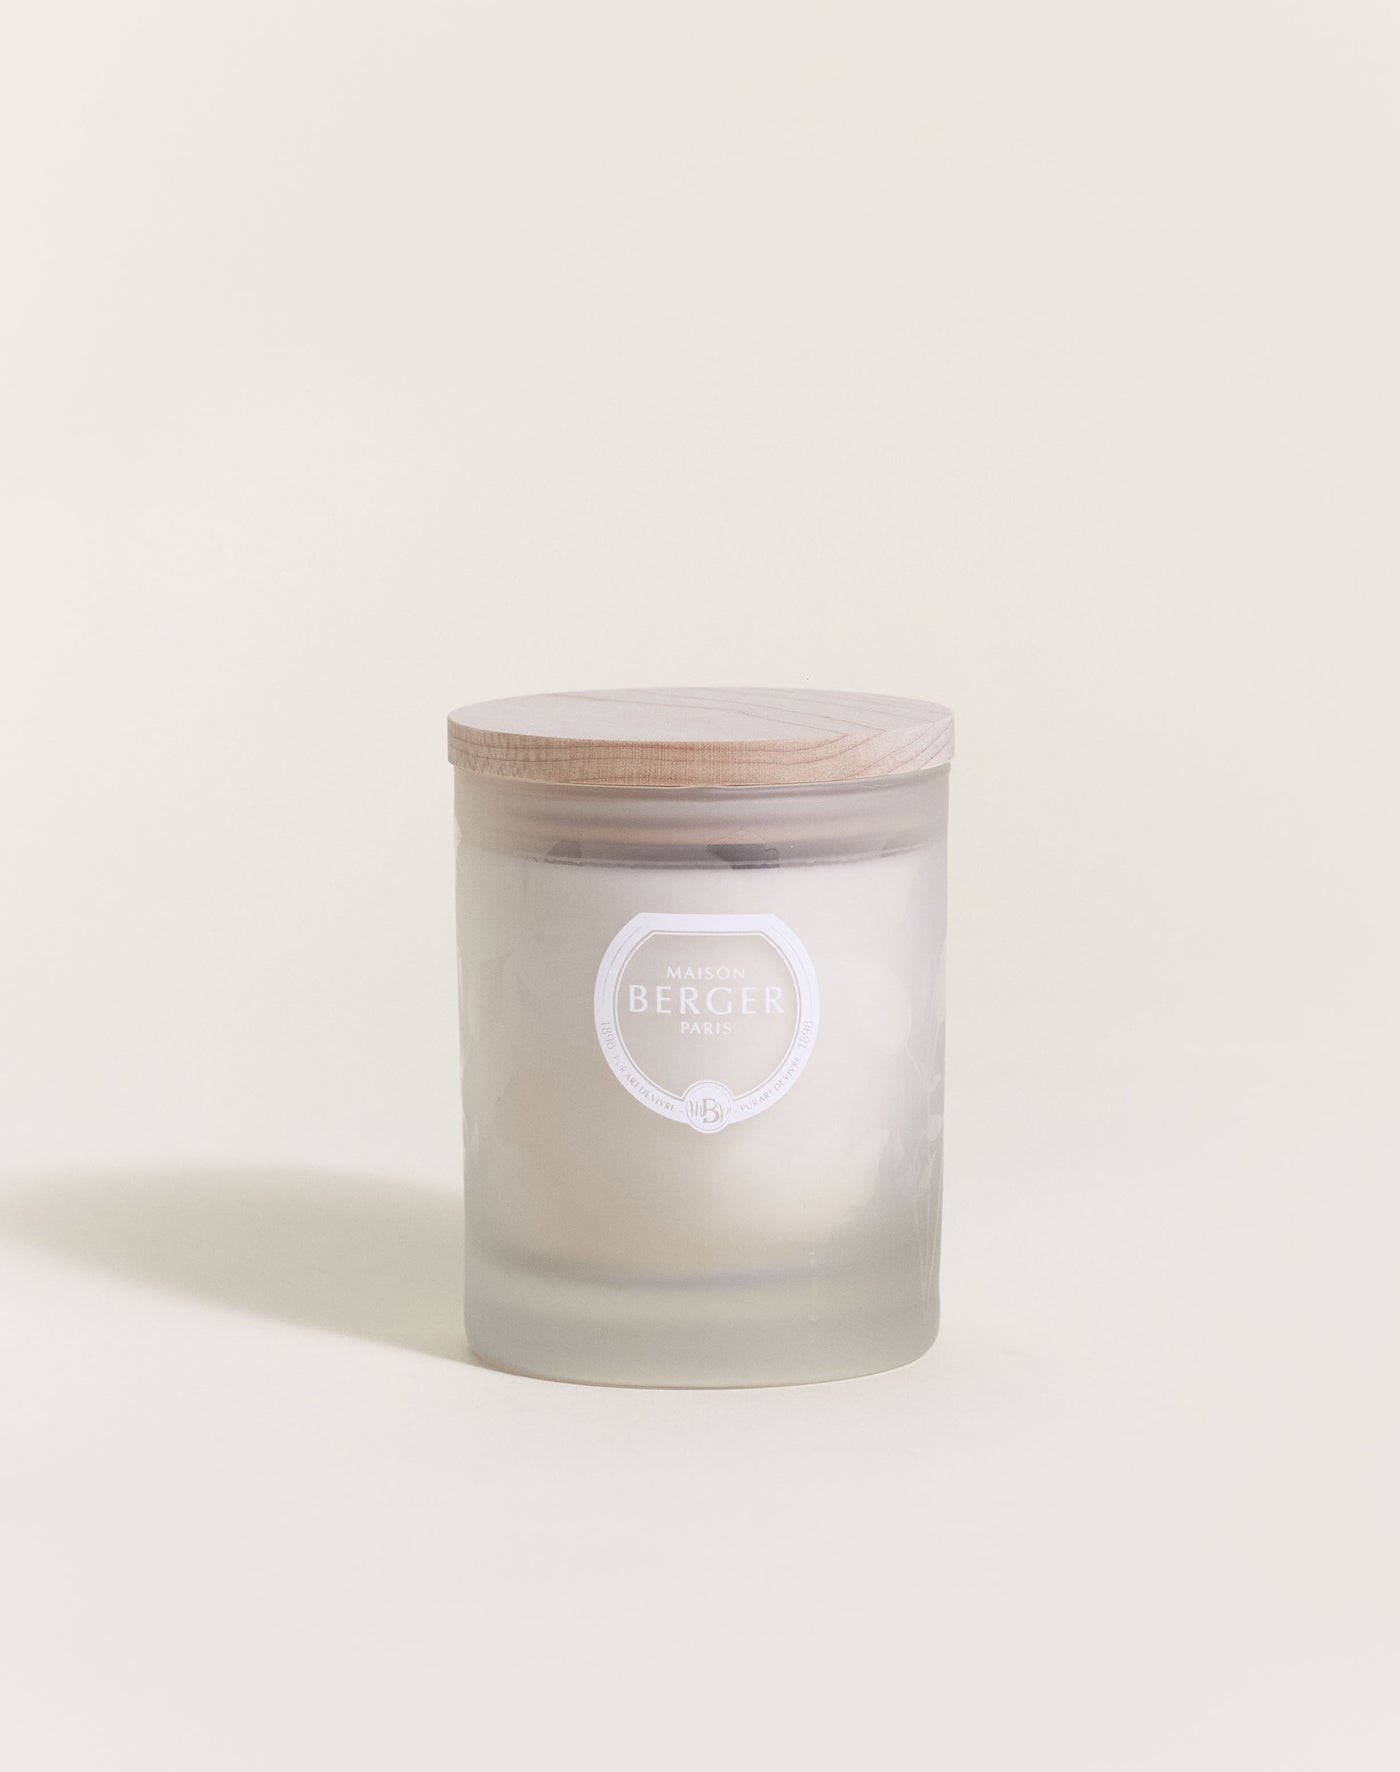 Aroma D-Stress Scented Candle